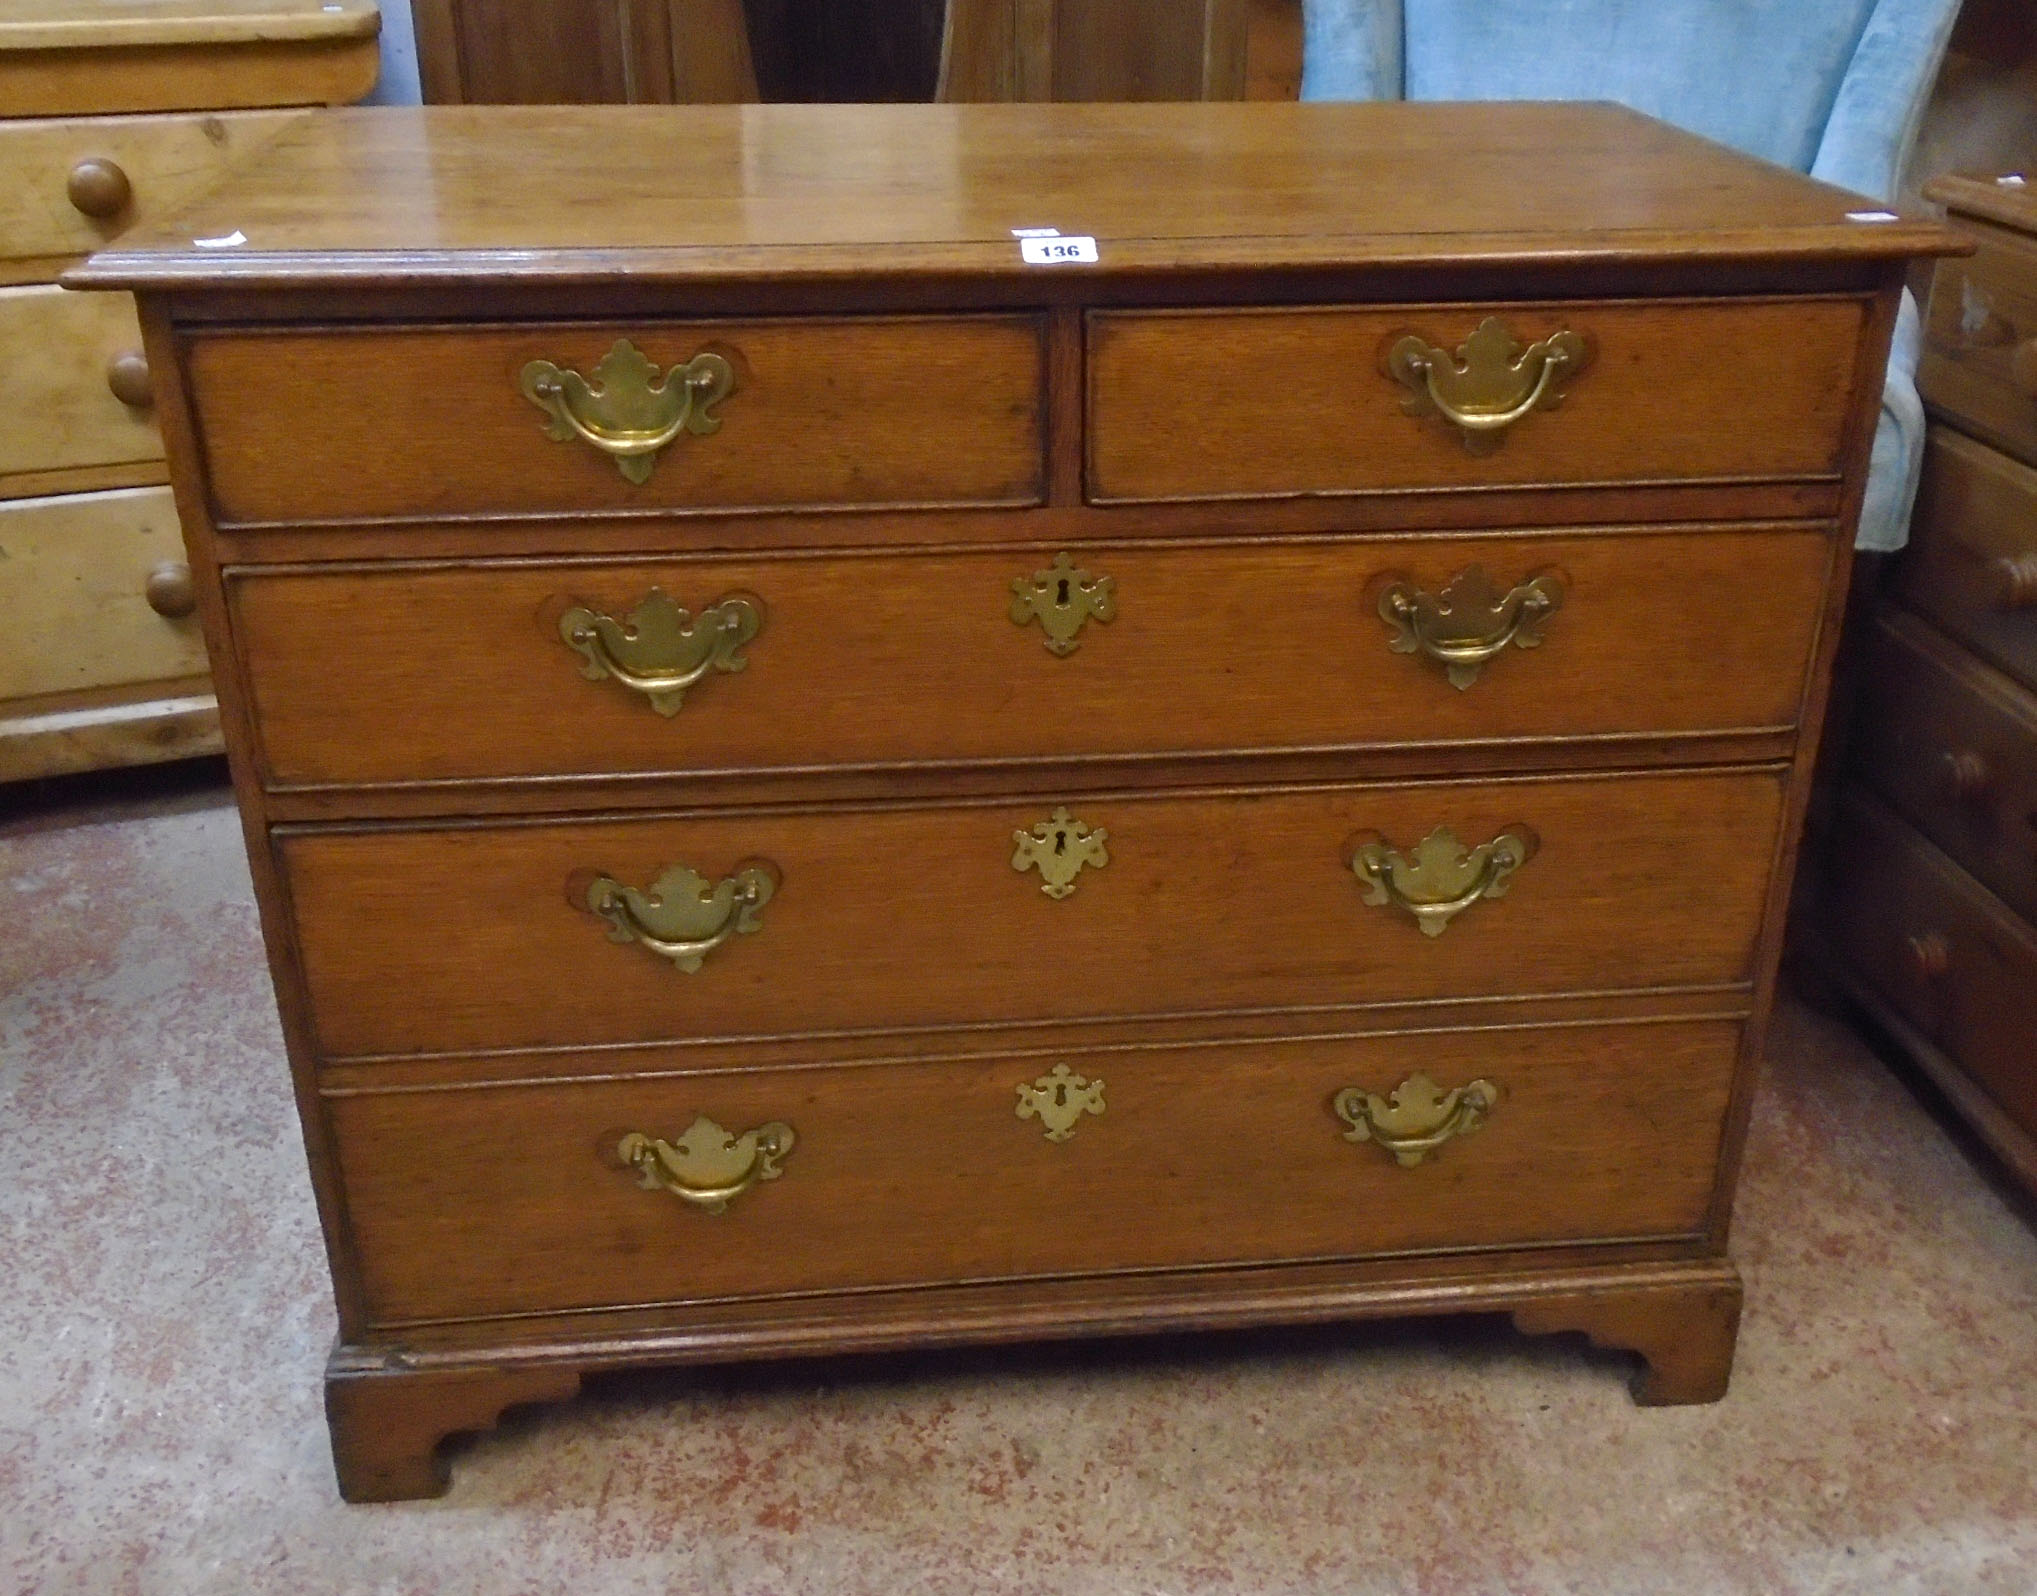 A 3' 3 1/2" late Georgian oak chest of two short and two long graduated drawers, the lower with